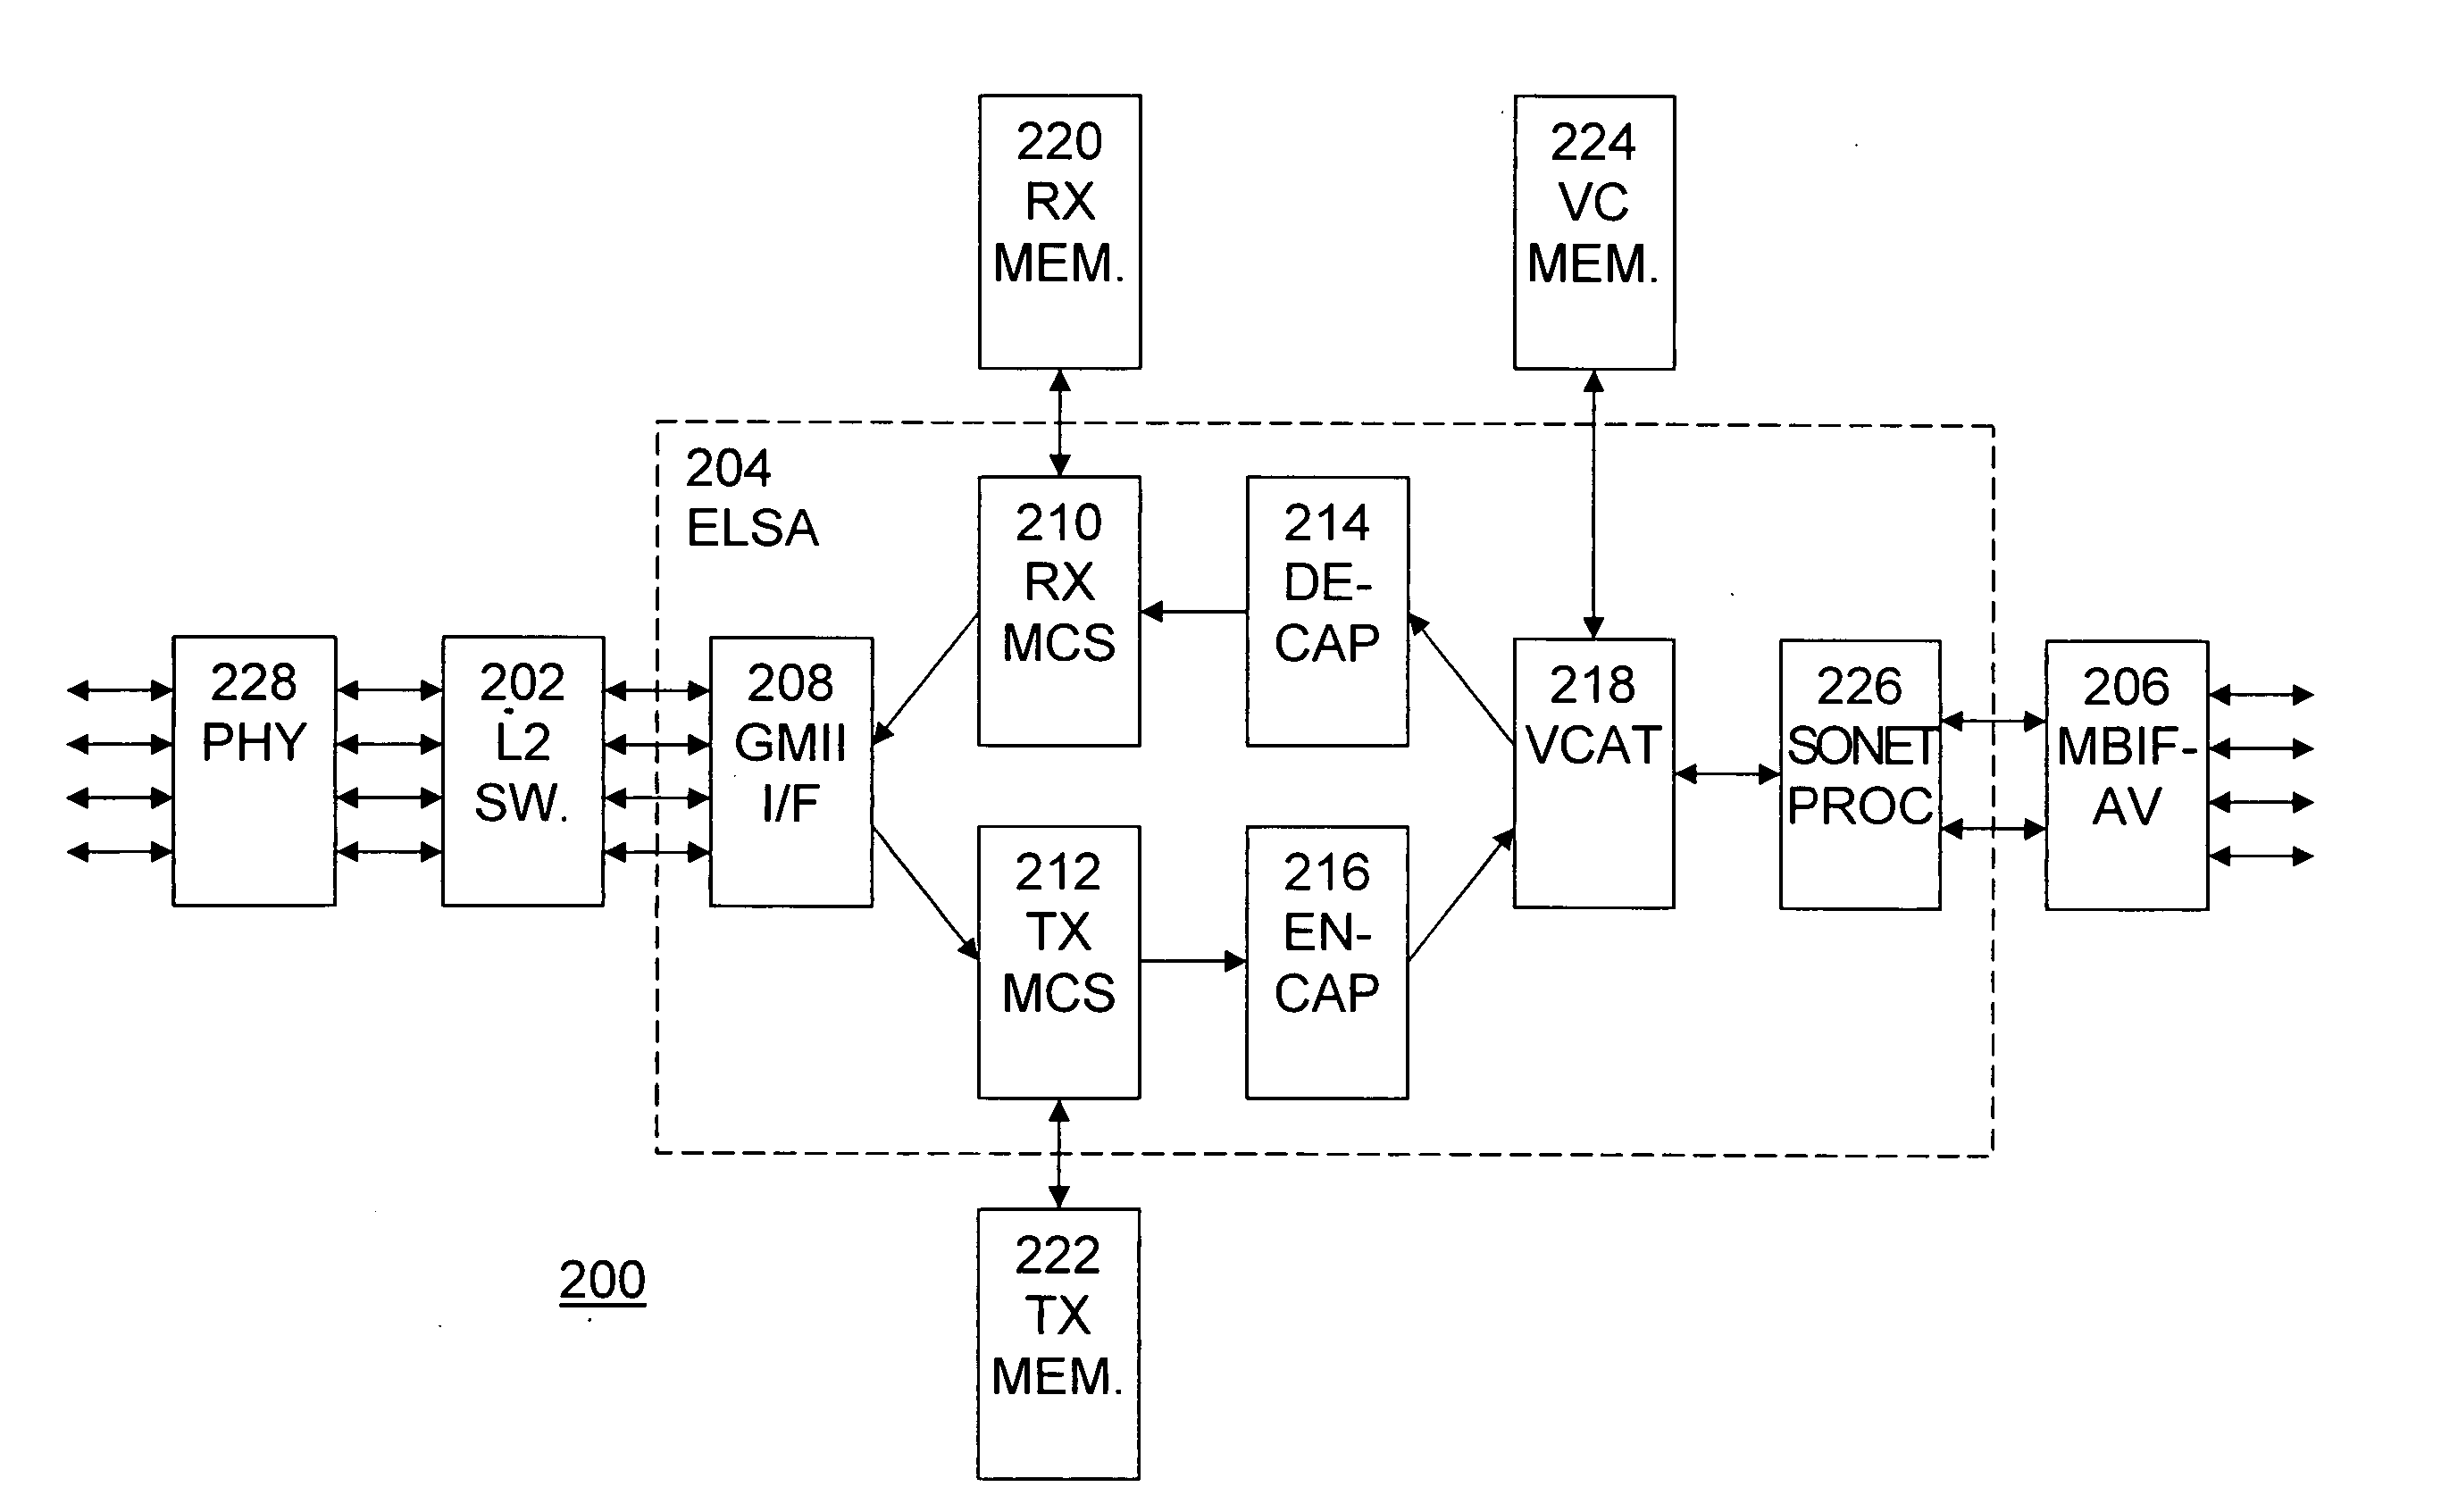 Common LAN architecture and flow control relay